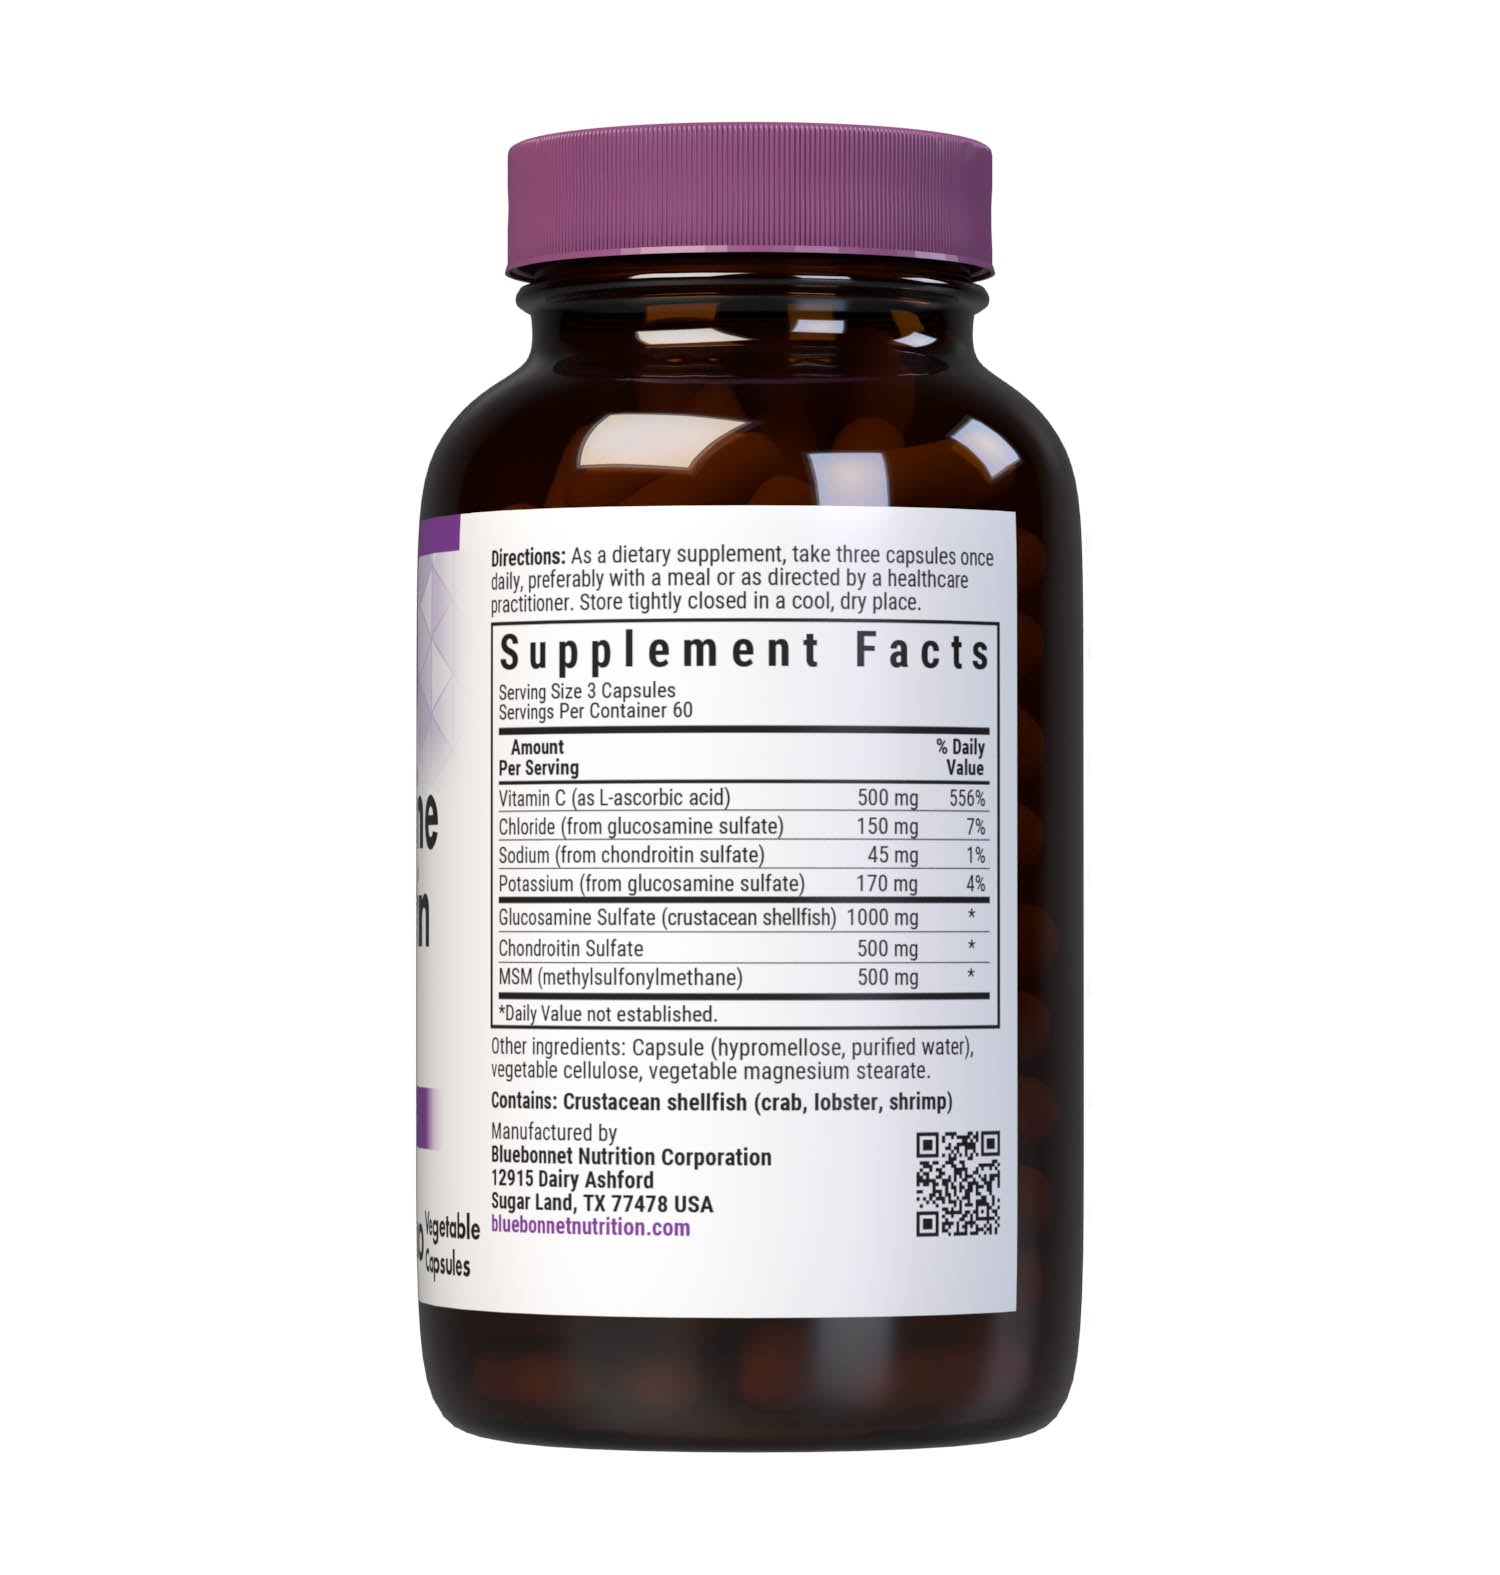 Bluebonnet’s Glucosamine Chondroitin Sulfate & MSM 180 Vegetable Capsules are specially formulated with a combination of glucosamine sulfate, chondroitin sulfate, OptiMSM an active form of sulfur, as well as vitamin C from Identity-Preserved (IP) L-ascorbic acid for optimal joint health. Supplement facts panel. #size_180 count